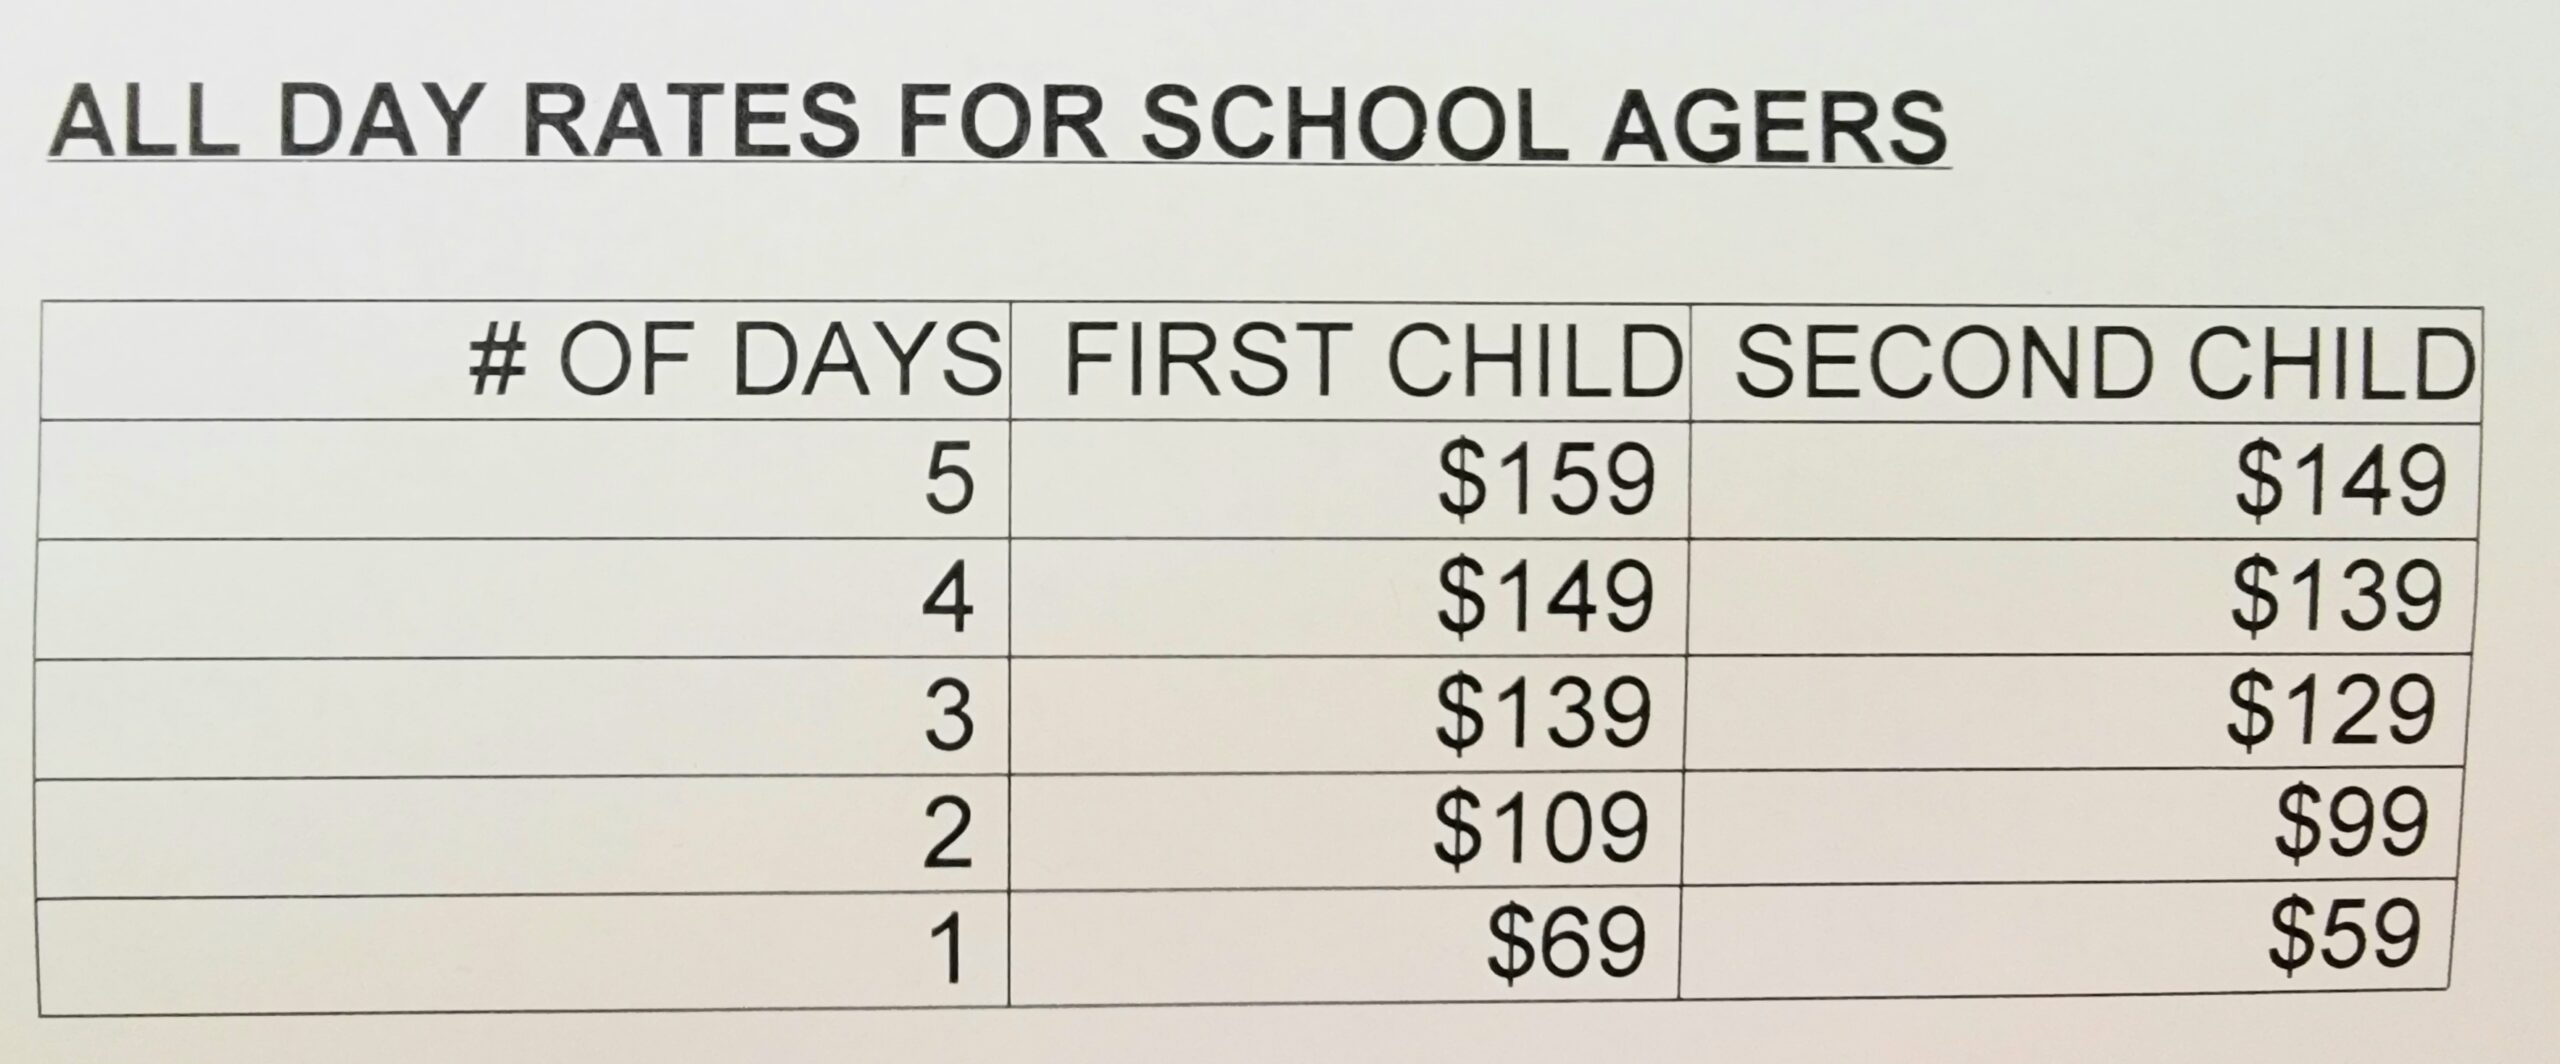 All Day Rates For School Agers